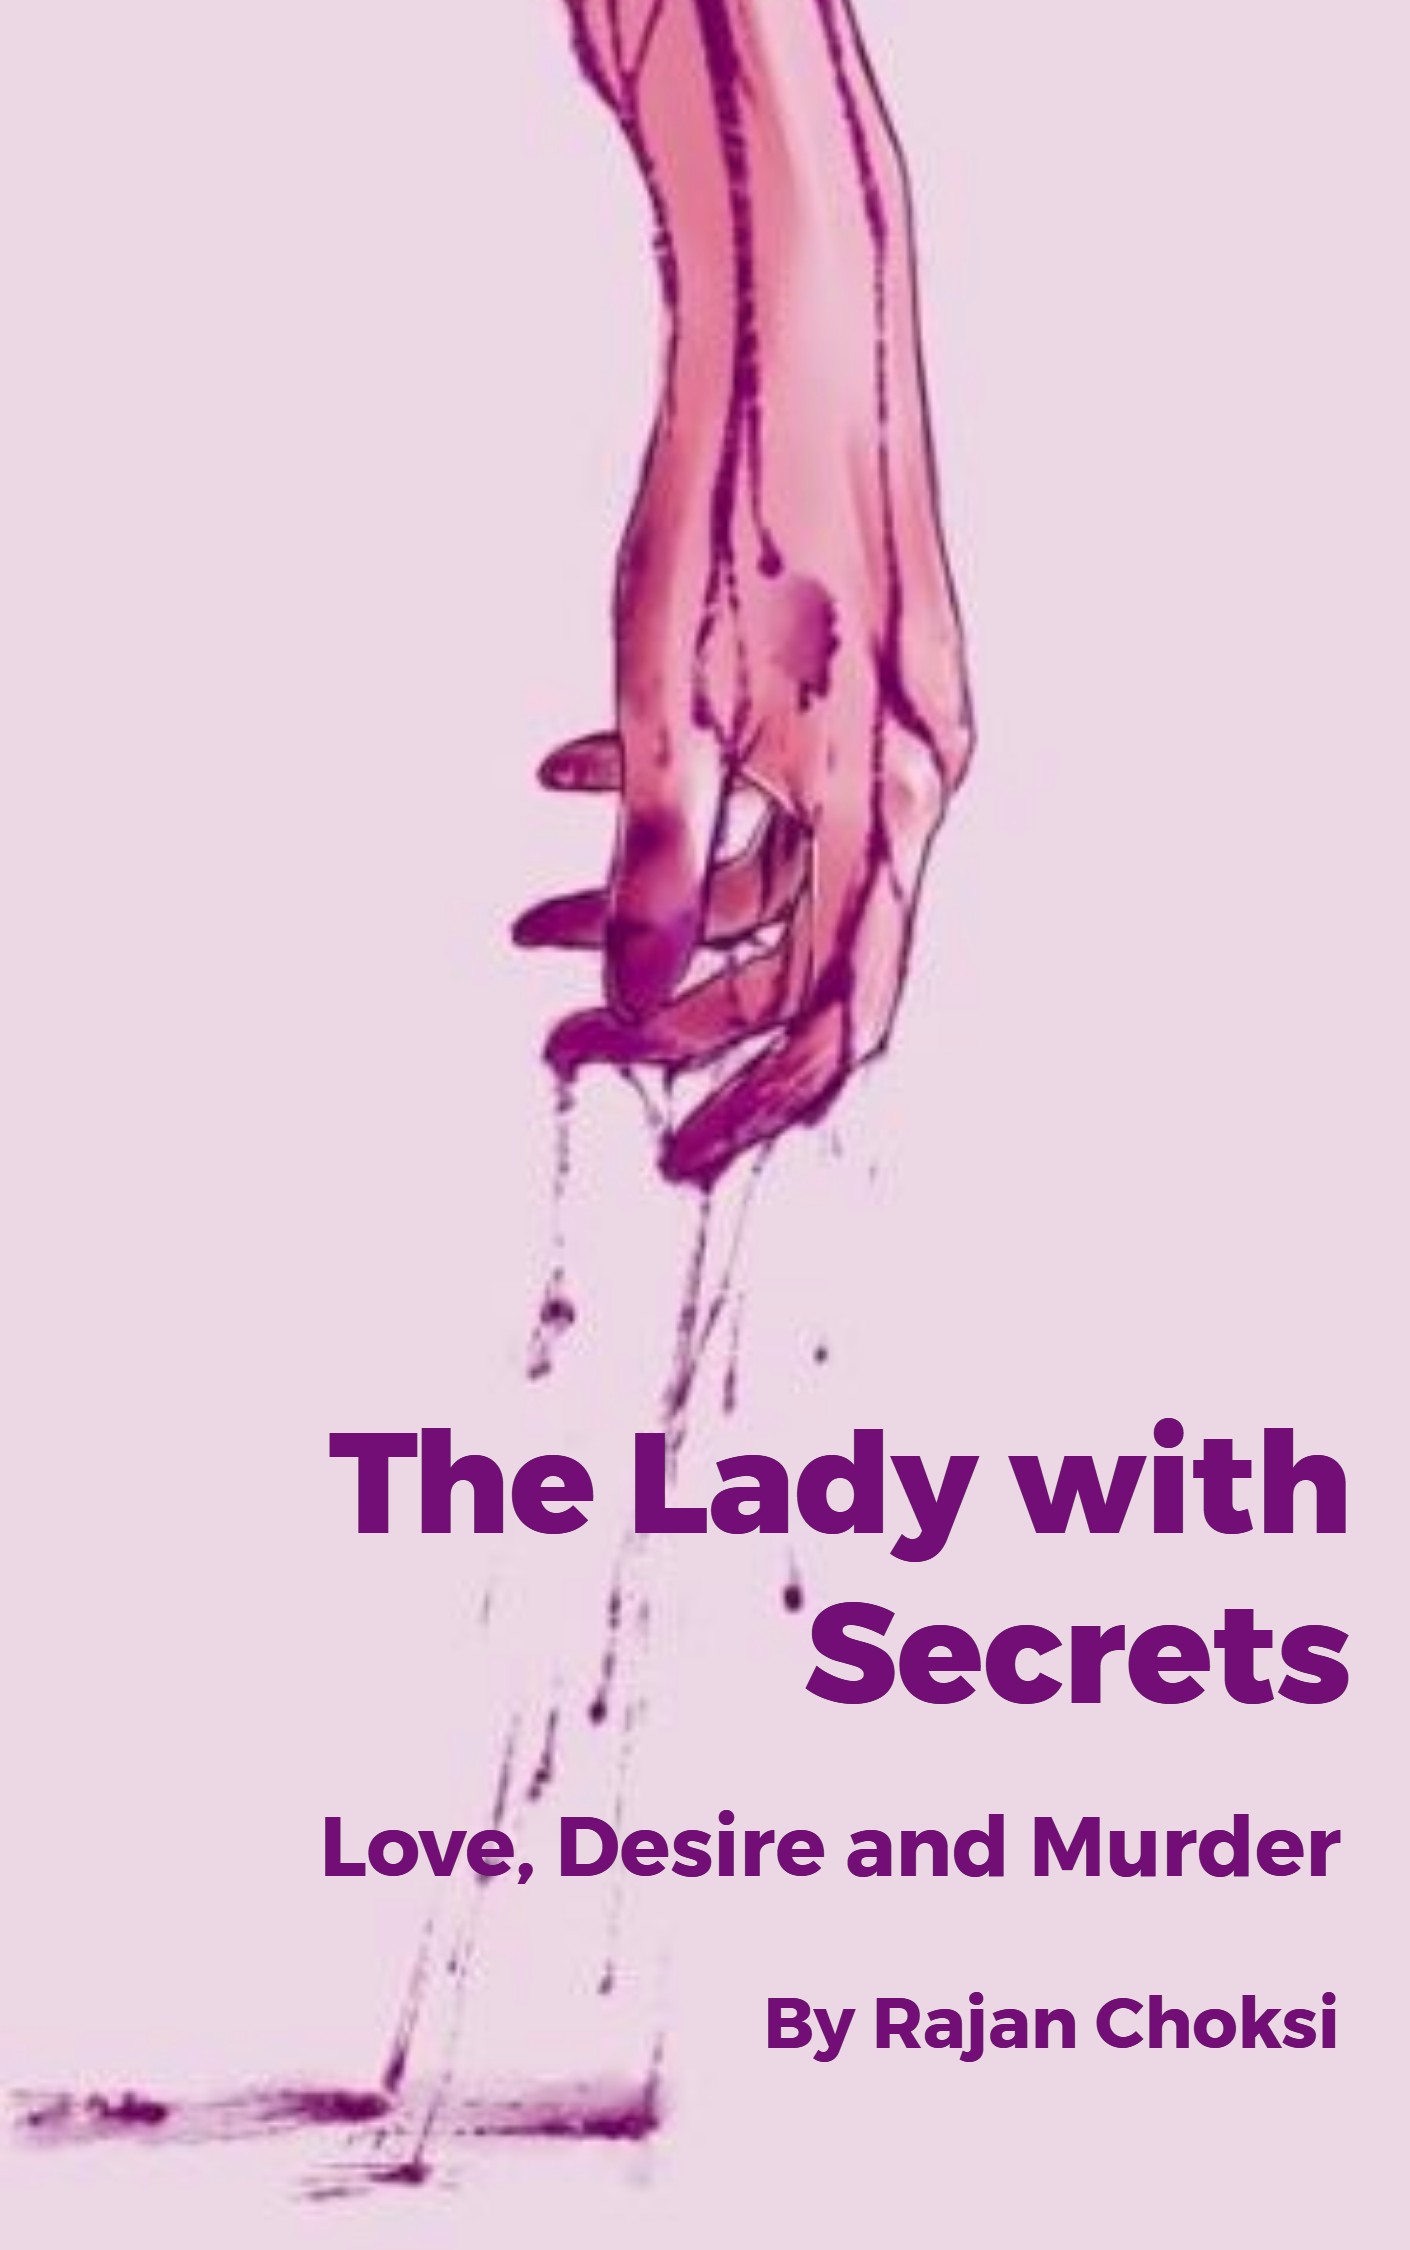 FREE: The Lady with Secrets – Love, Desire and Murder by Rajan Choksi